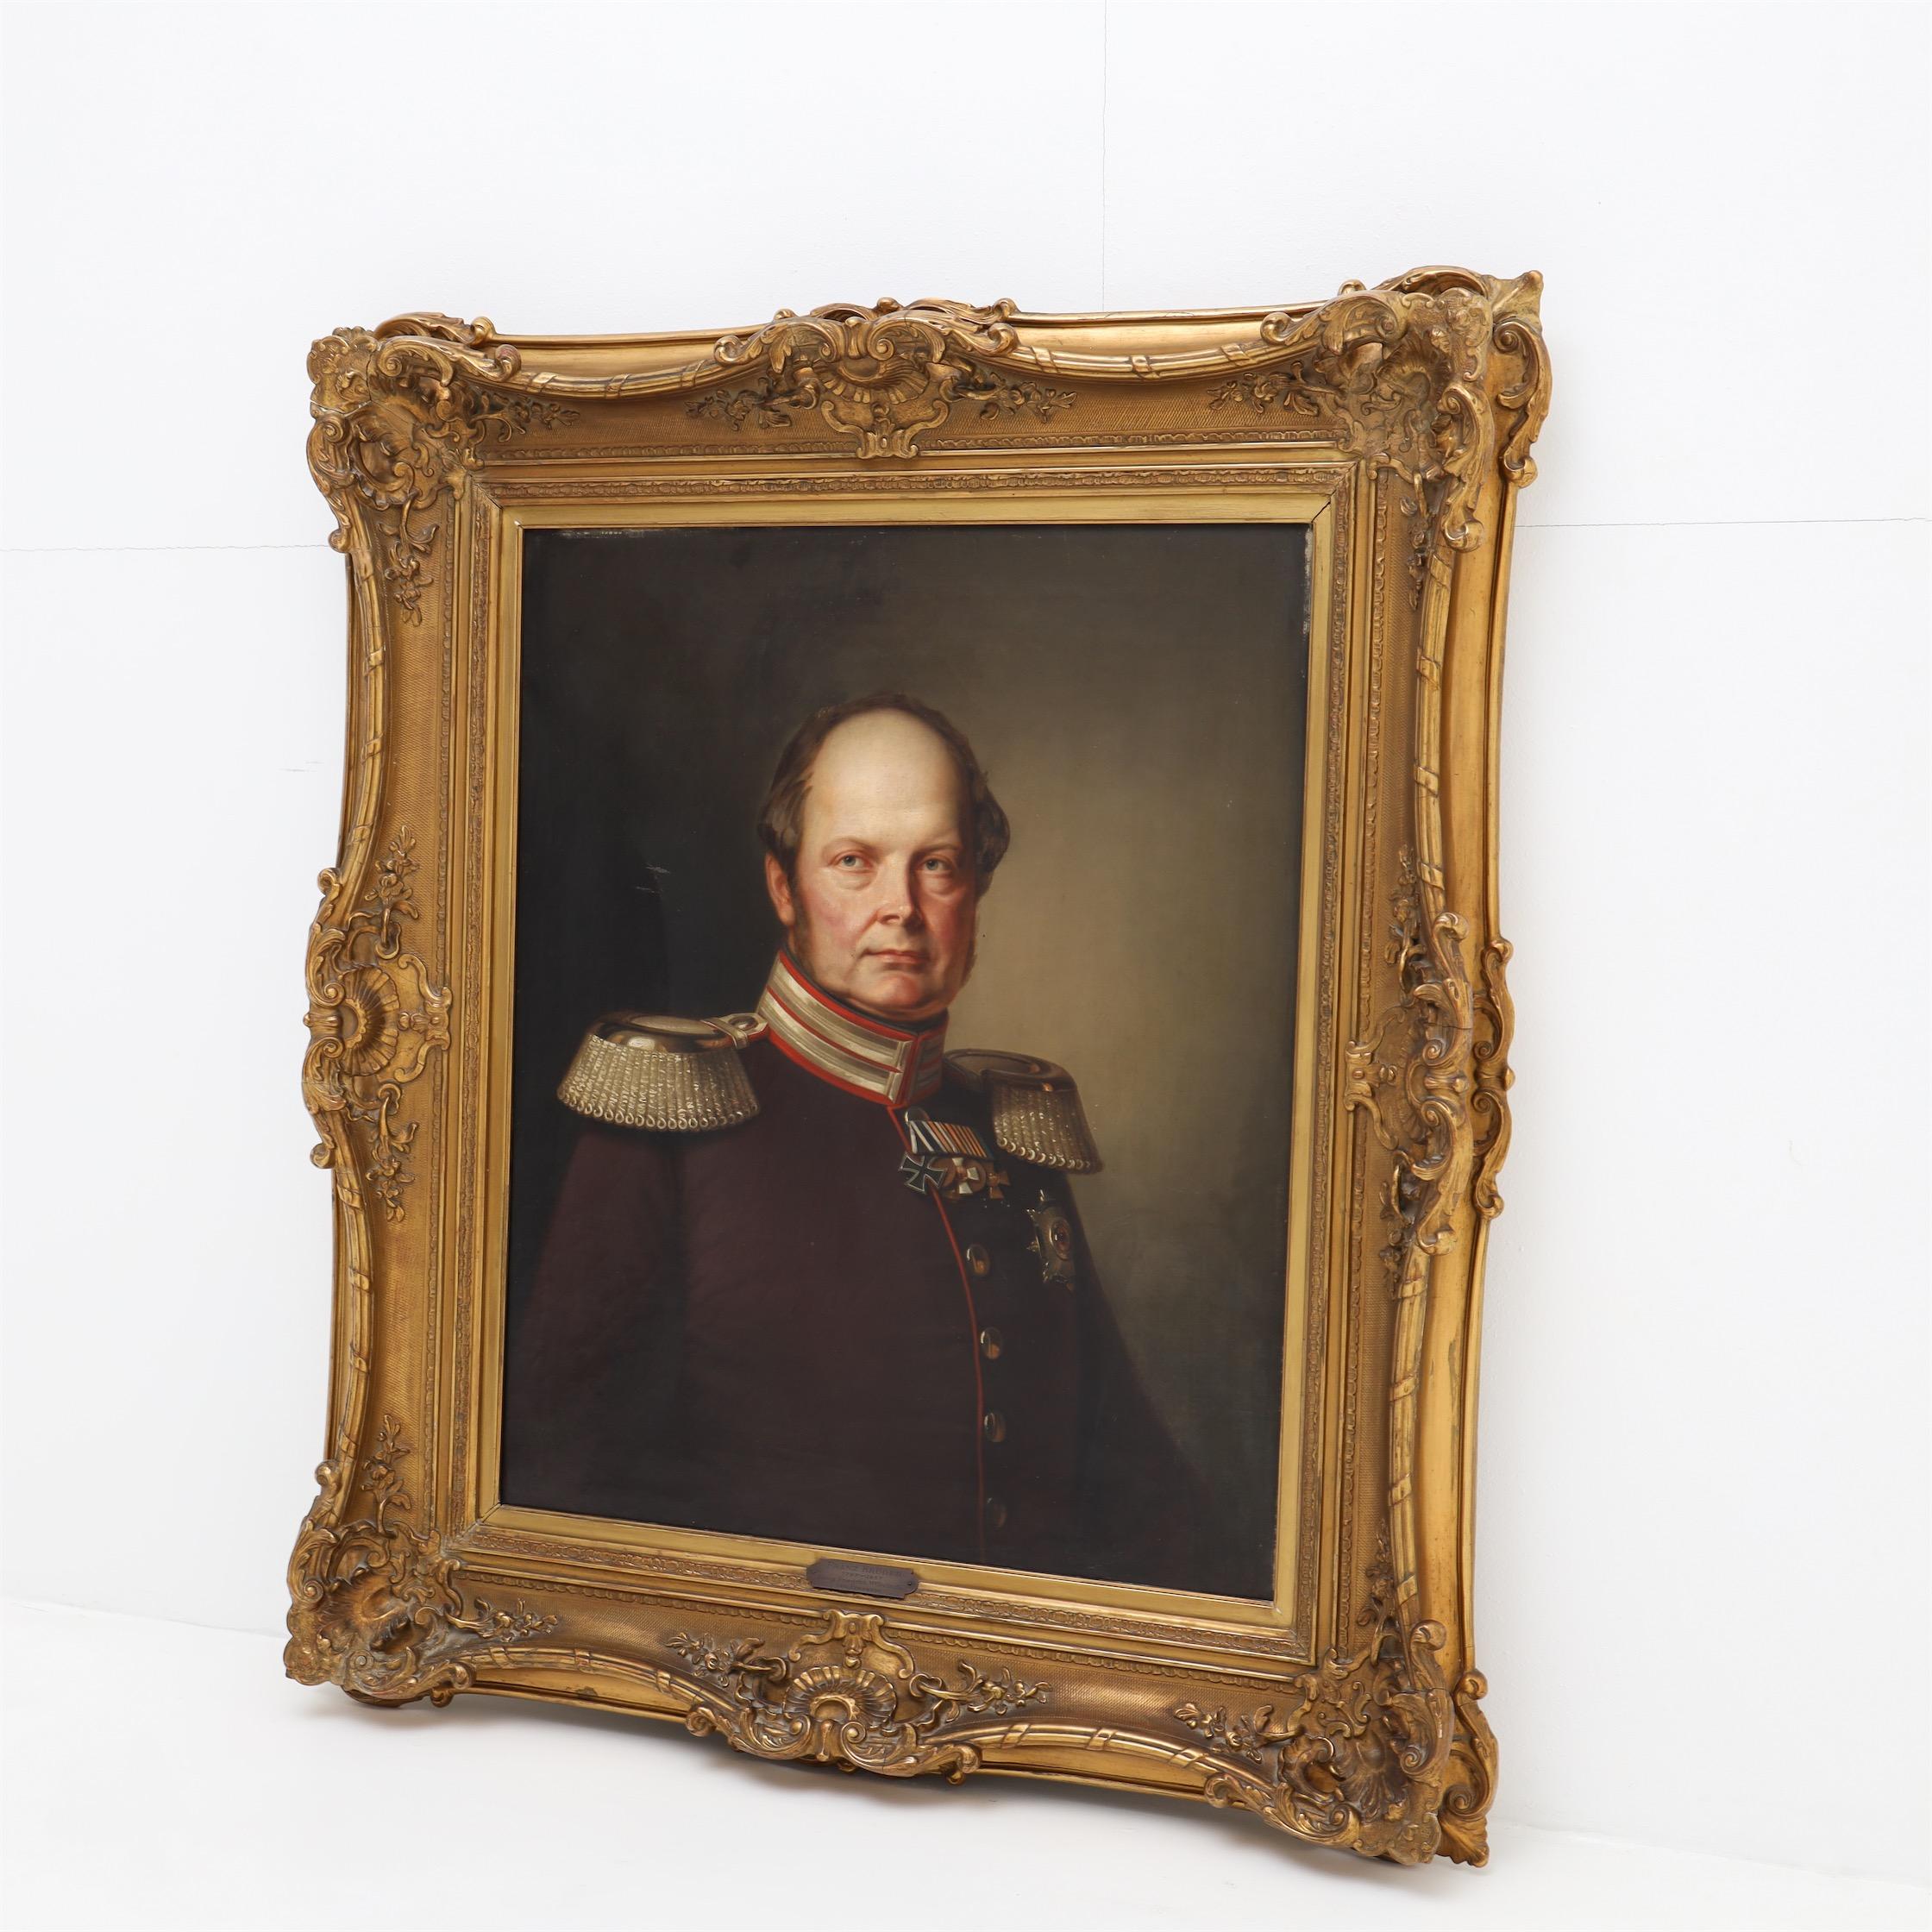 Portrait of King Friedrich Wilhelm IV. of Prussia in uniform with different orders, by Franz Krüger (1797-1857). 
Oil on canvas. 
In a golden patinated and stuccoed baroque style frame. 
Canvas size: 73,5 x 60 cm
Inventory labels on the reverse